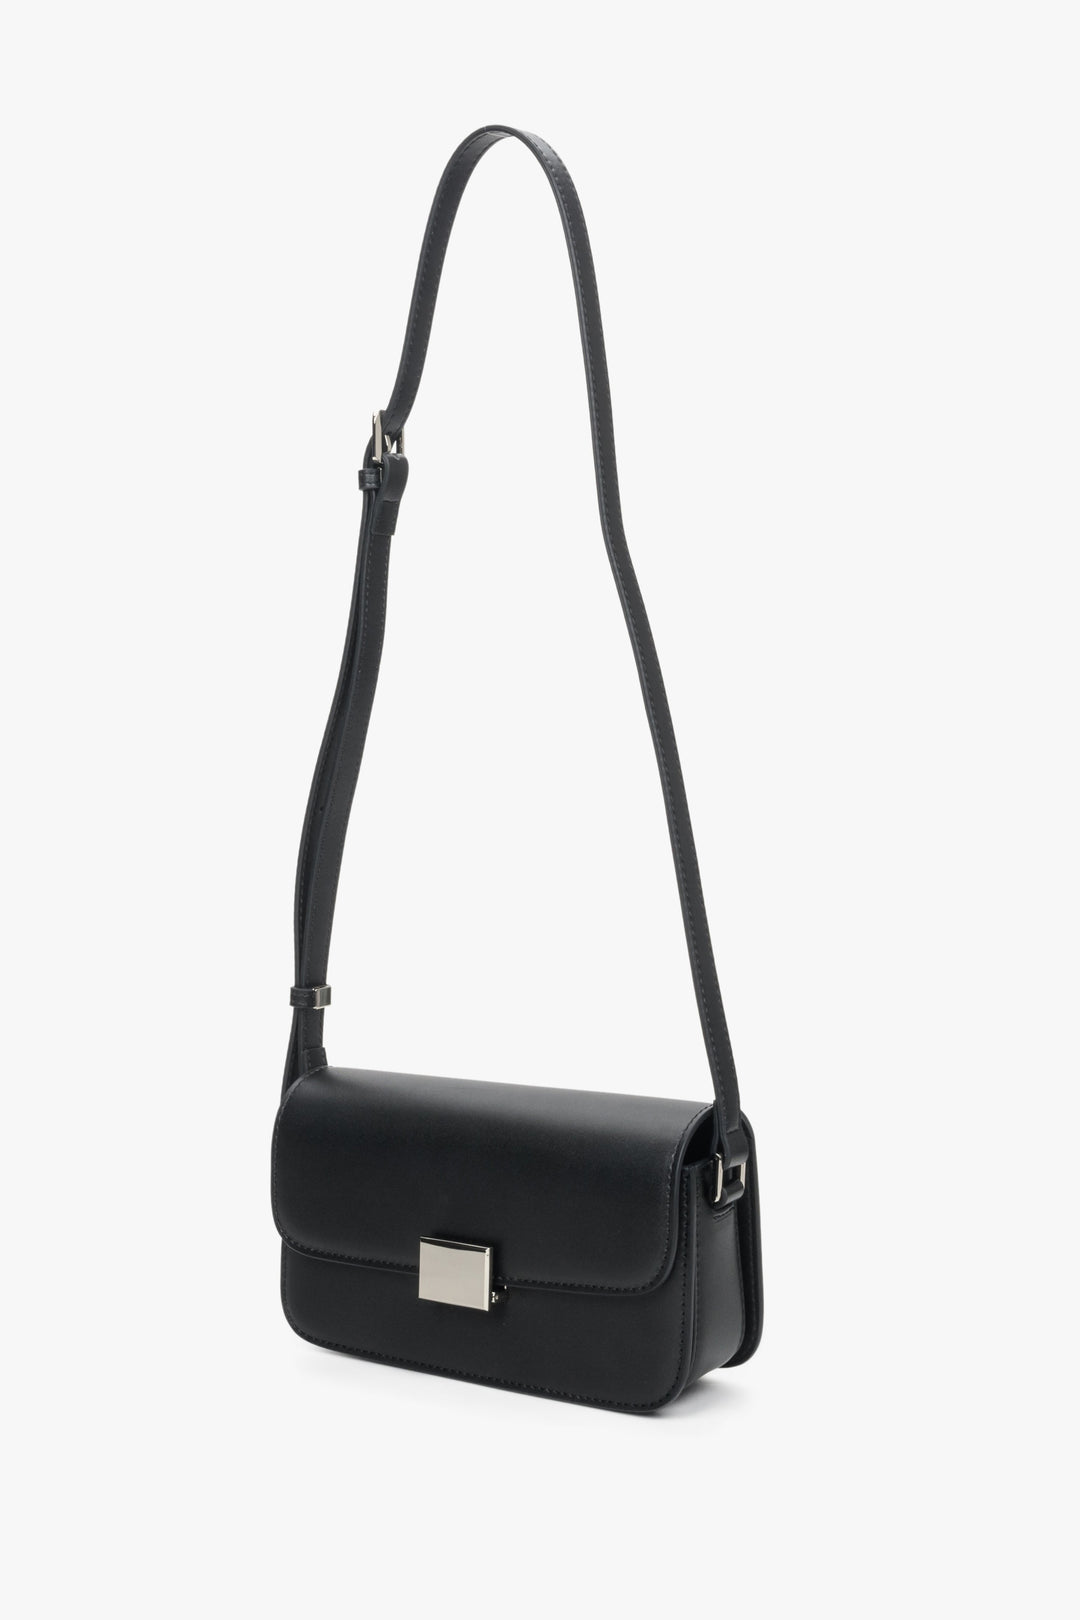 Women's black leather handbag with silver fittings Estro - presentation of the model with an extended strap.